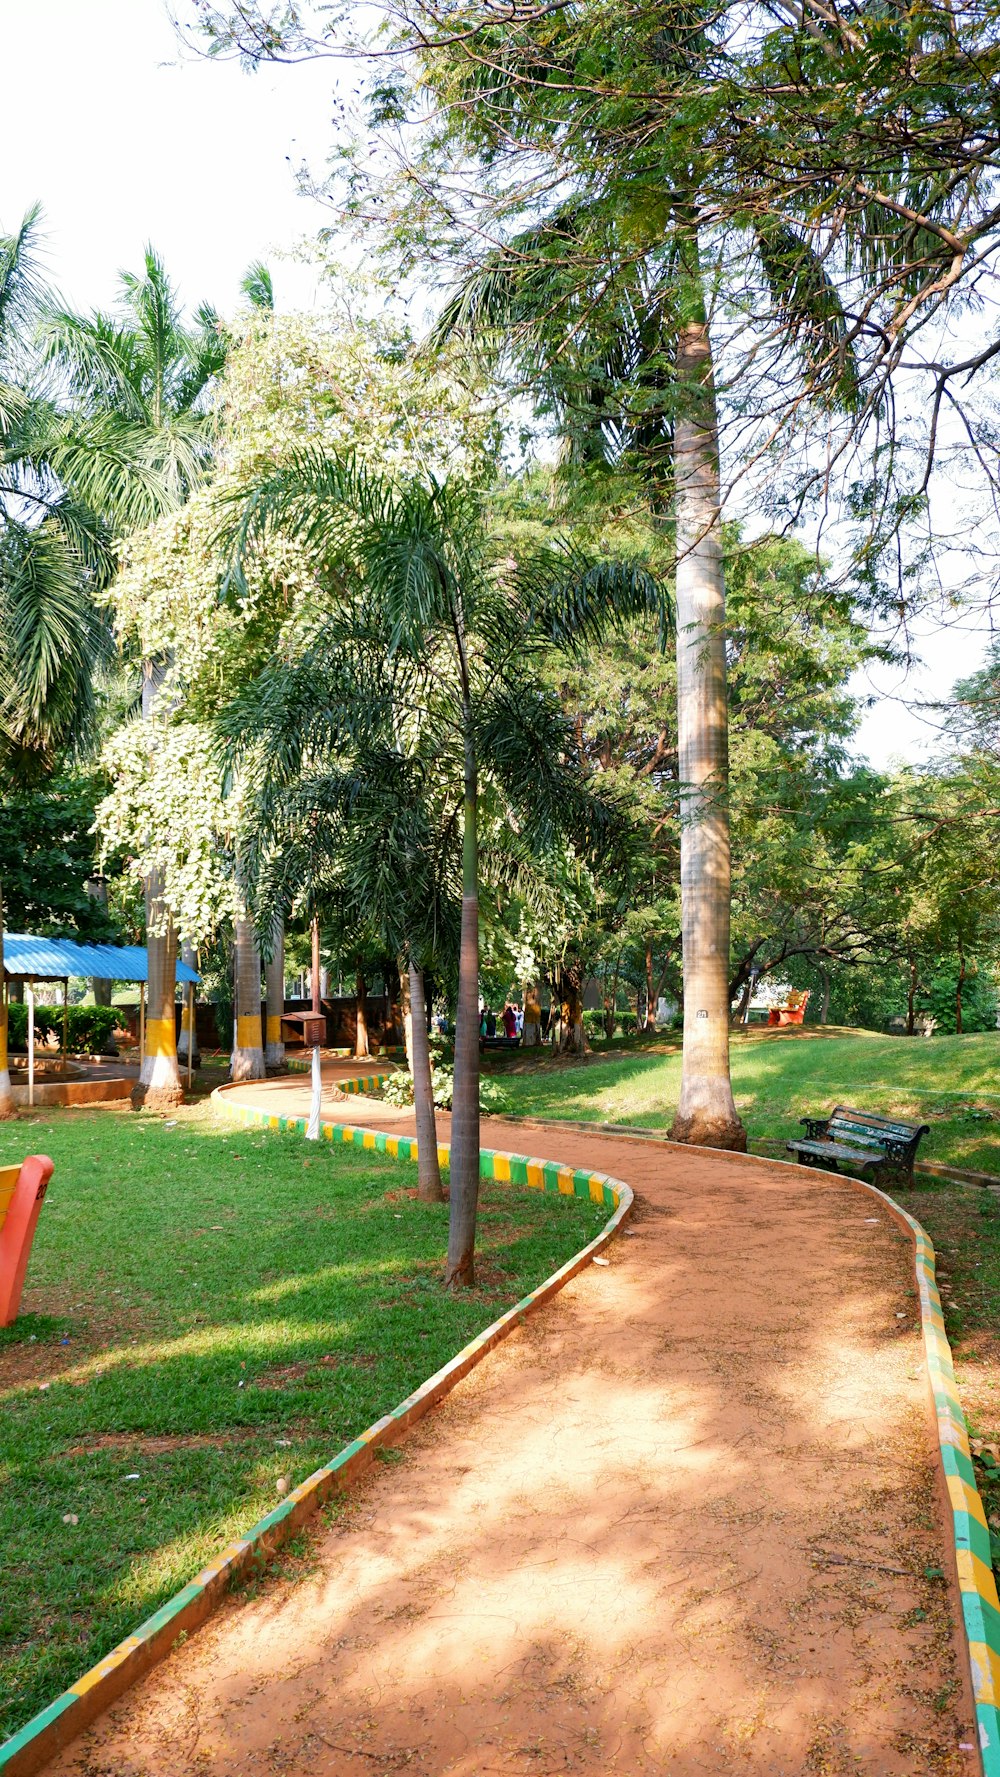 a park with benches, trees, and a dirt path